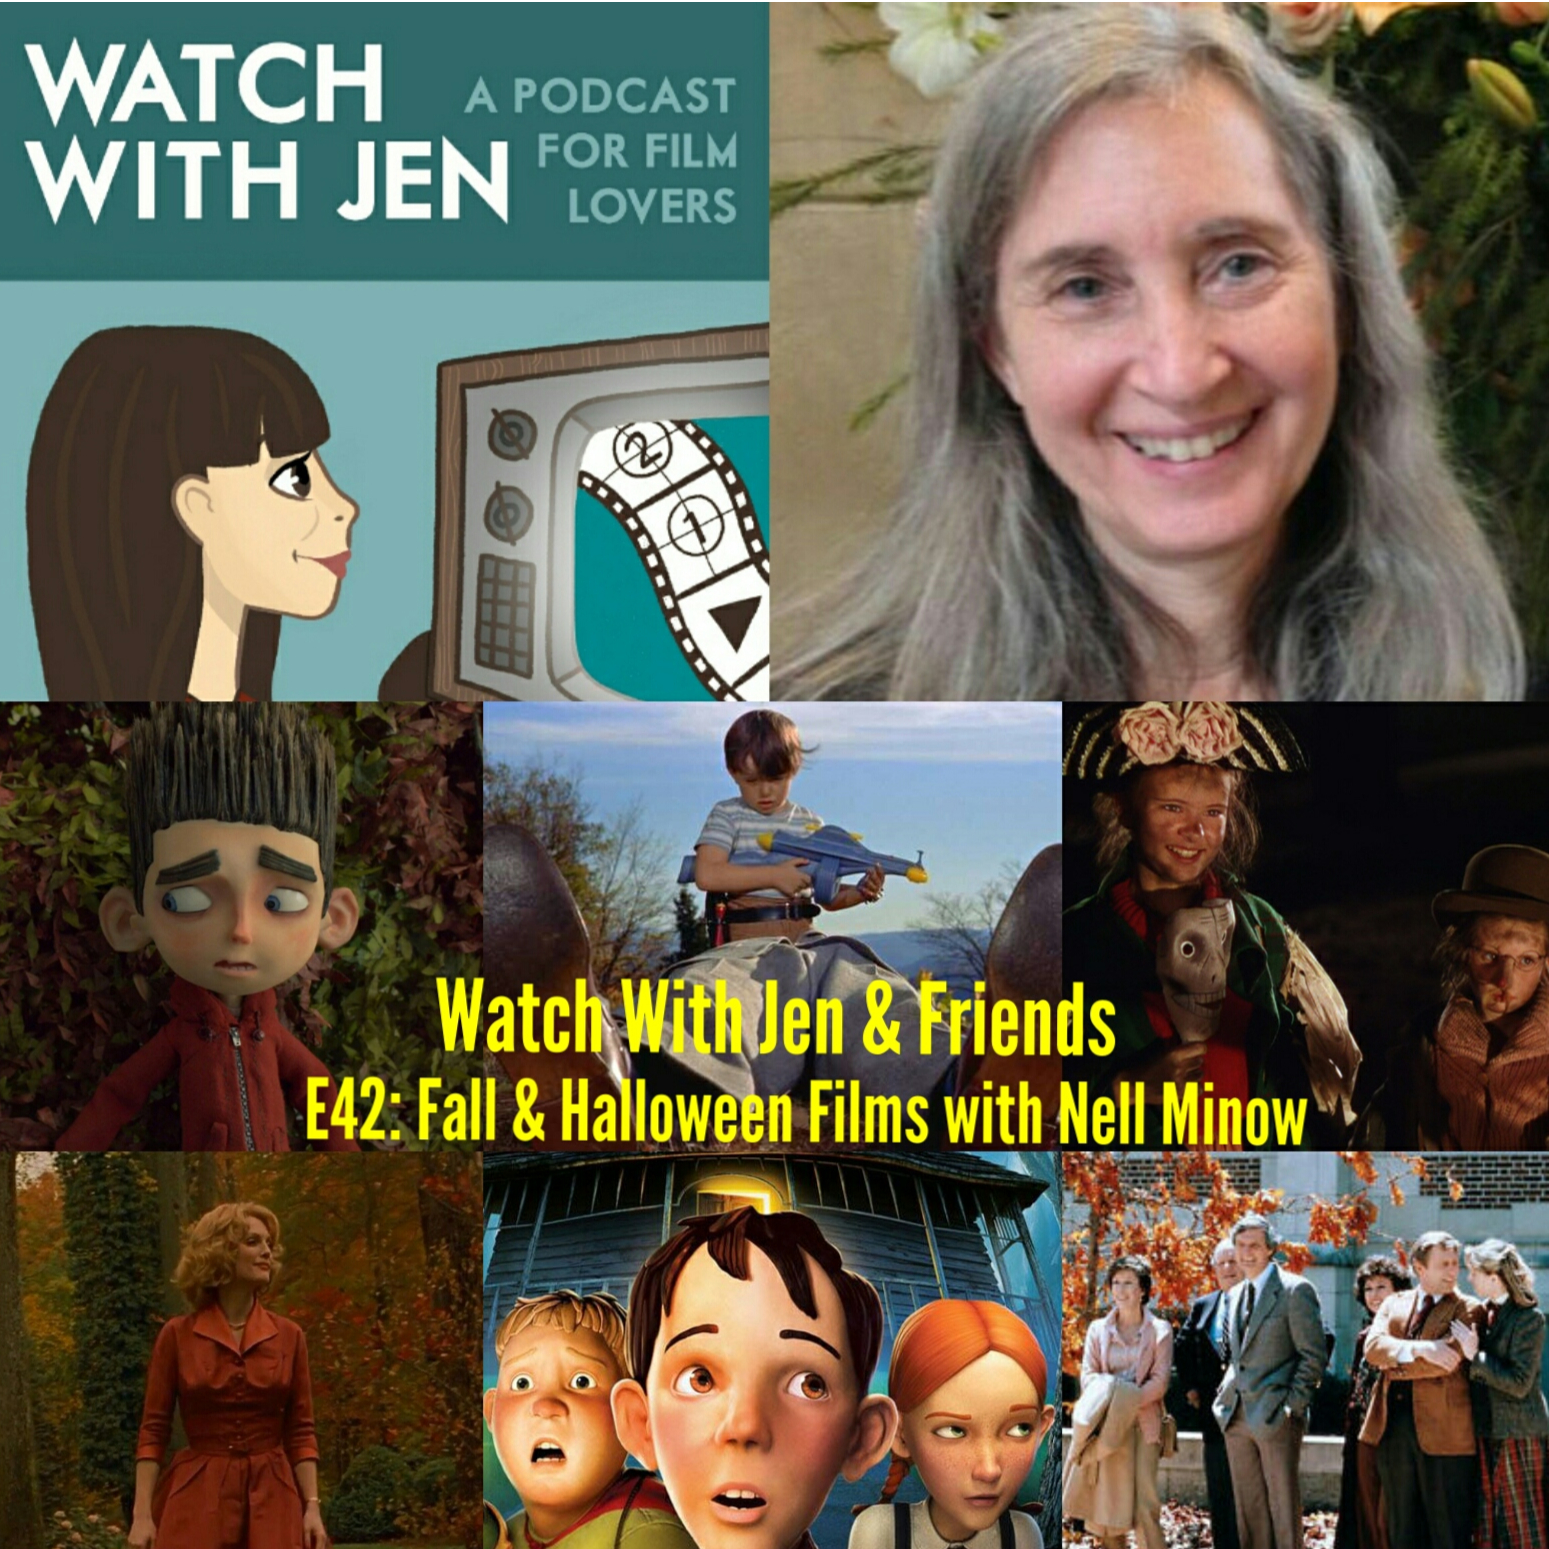 Watch With Jen & Friends: Episode 42 - Fall & Halloween Films with Nell Minow